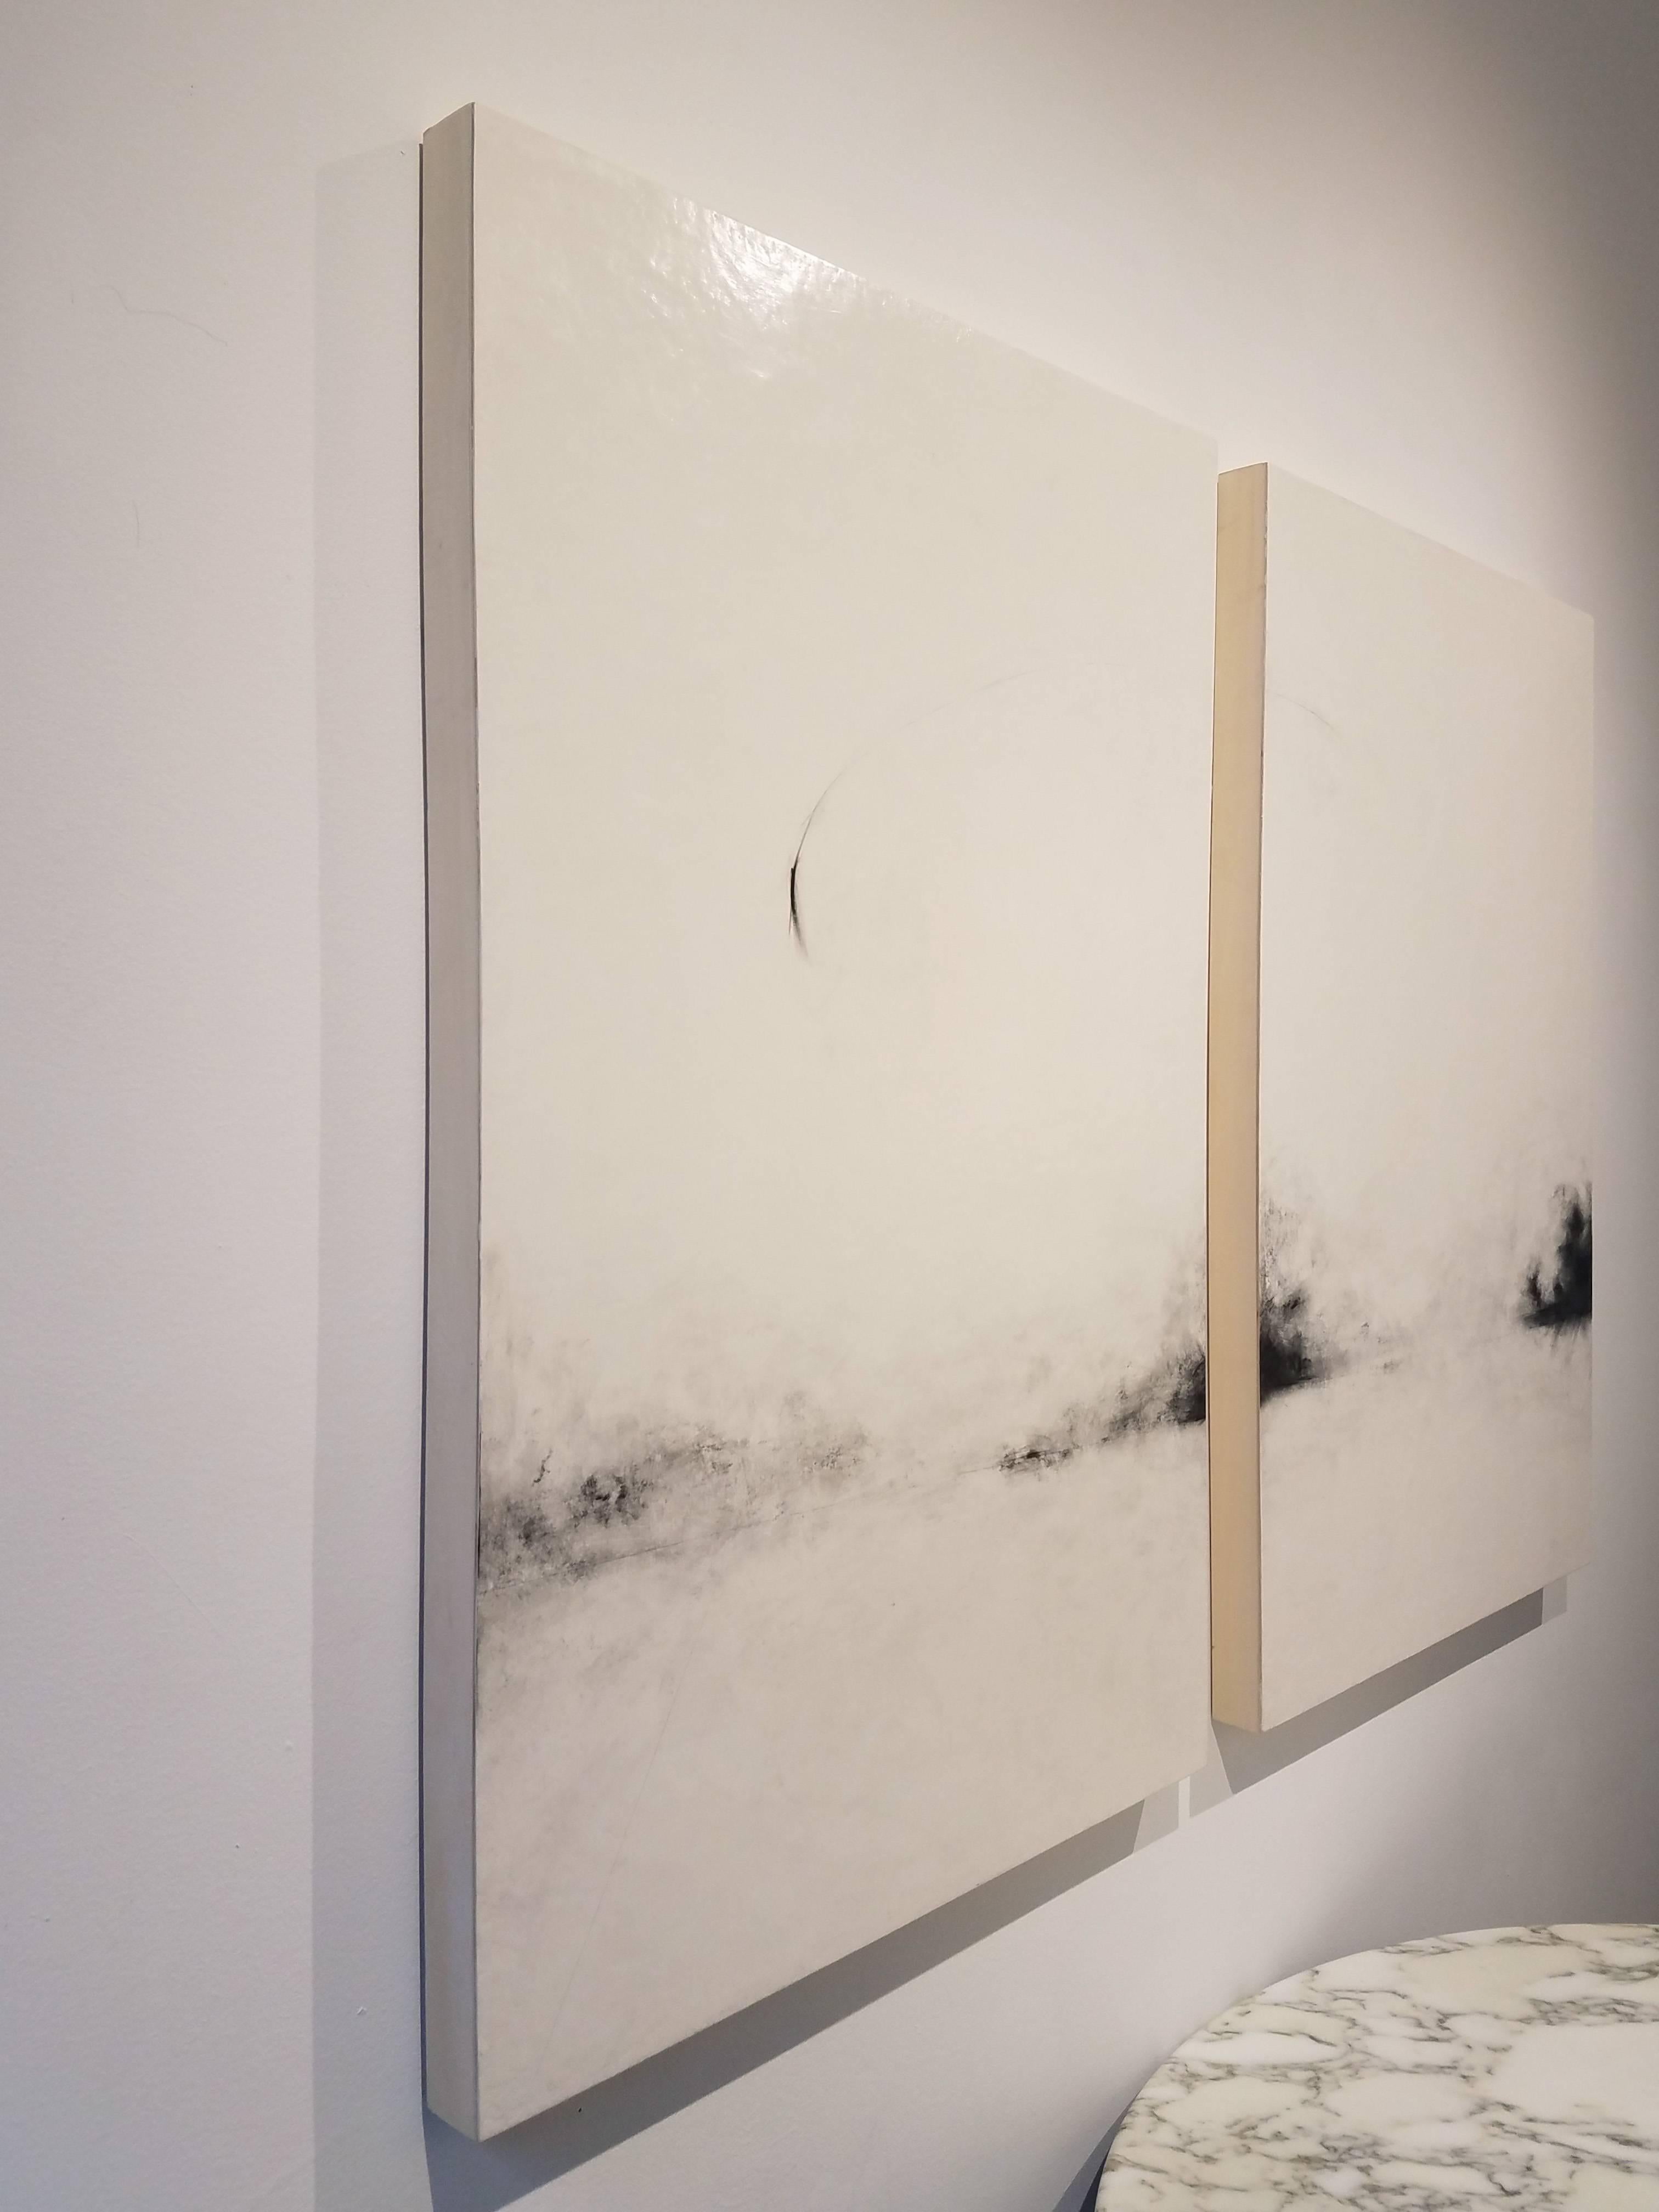 Nancy Hubbard, a mixed media artist, works primarily in black and white. To create this diptych, she applied a homemade gesso to two wood panels. 
She then drew a smokey, ethereal abstract landscape with charcoal and graphite. The piece is finished